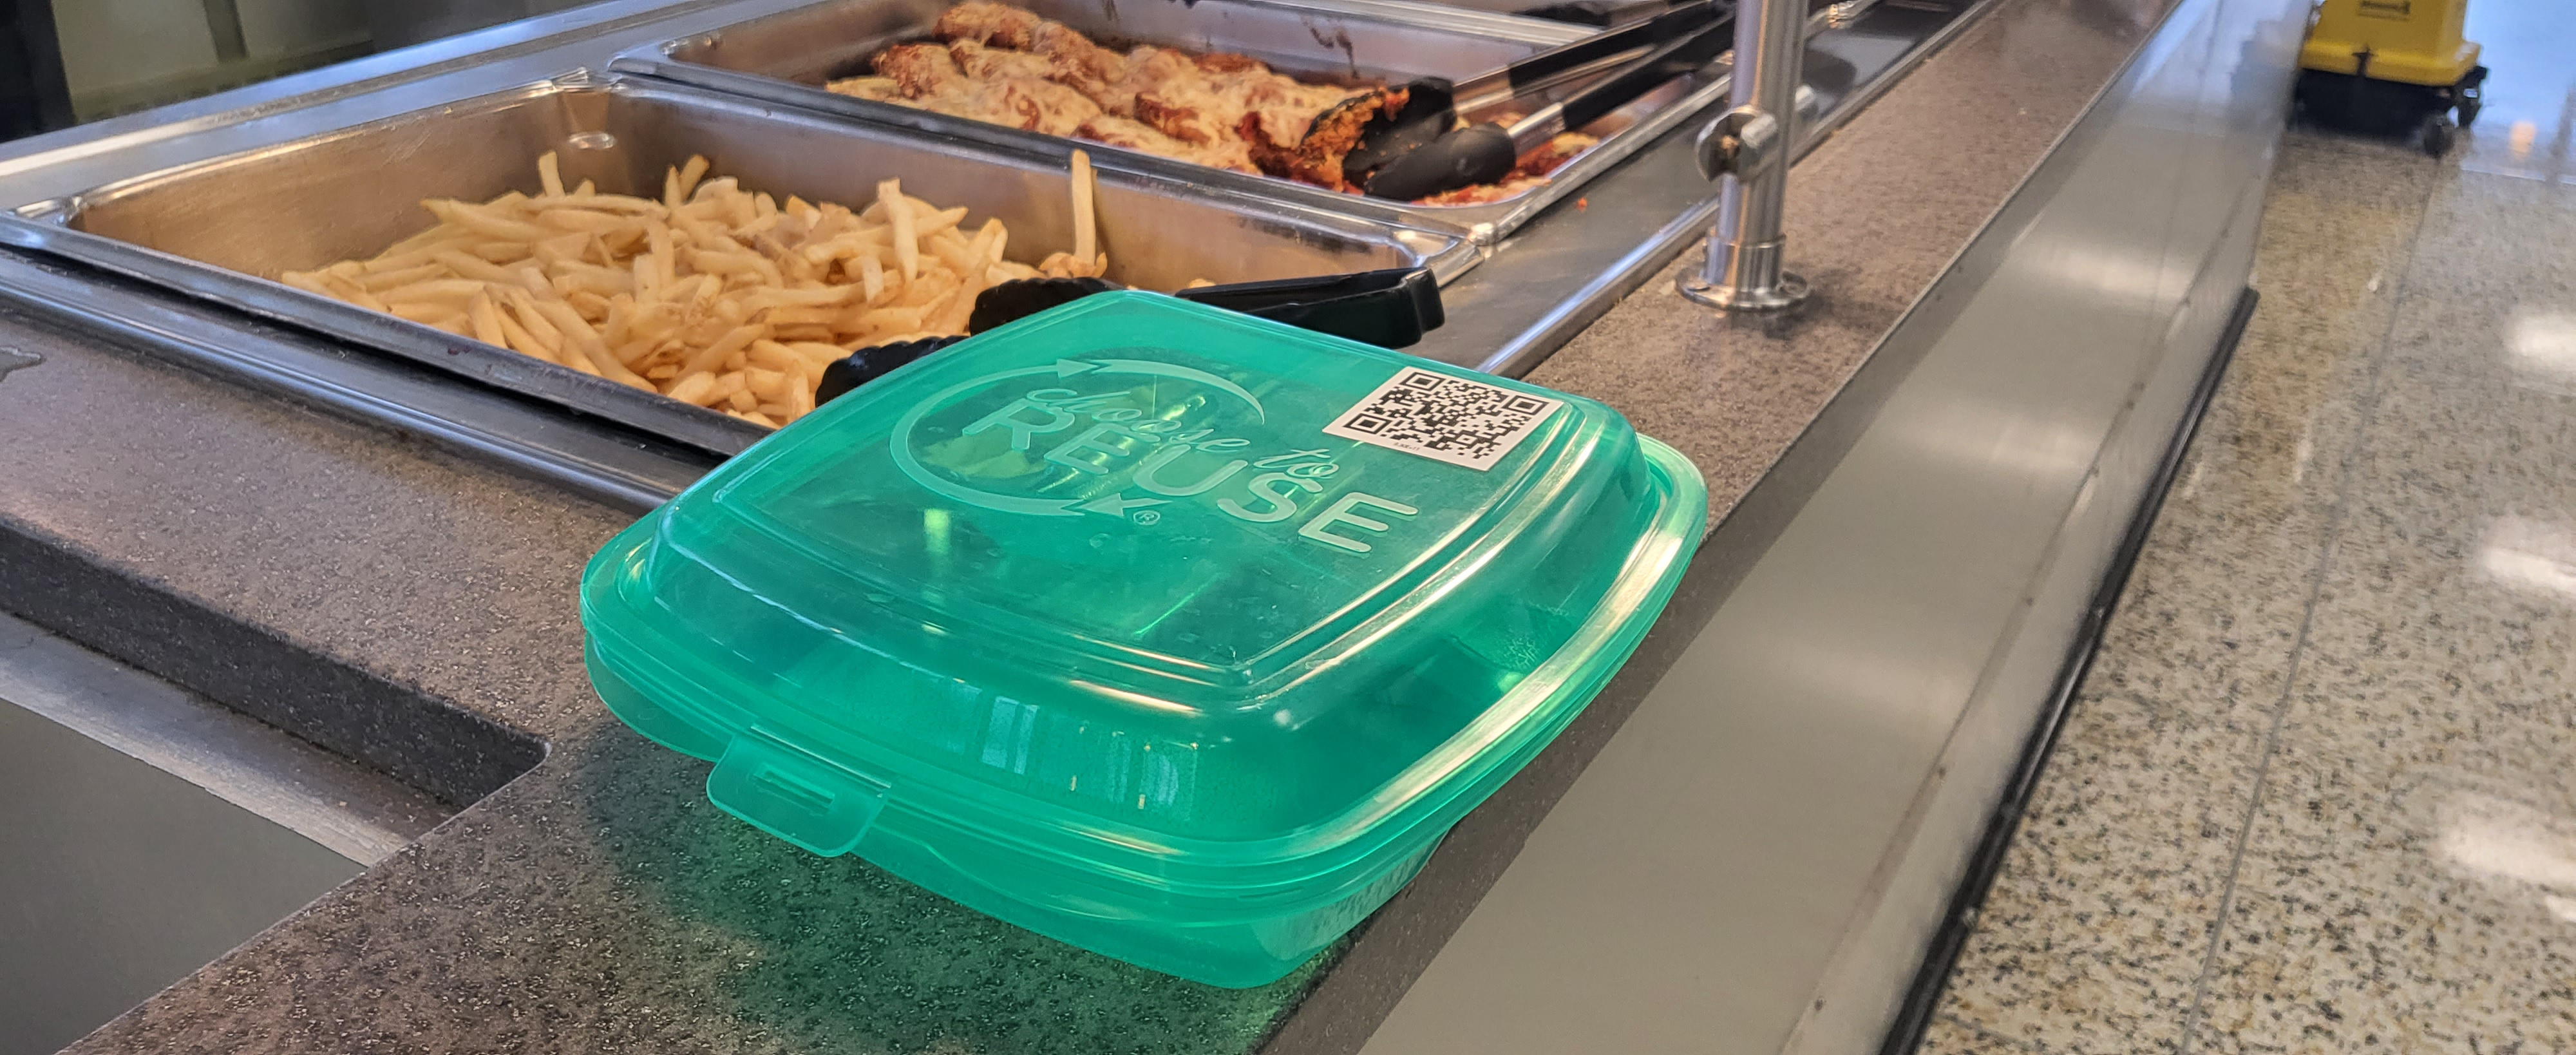 Reusable containers in, BYO mugs out during COVID dining services  operations